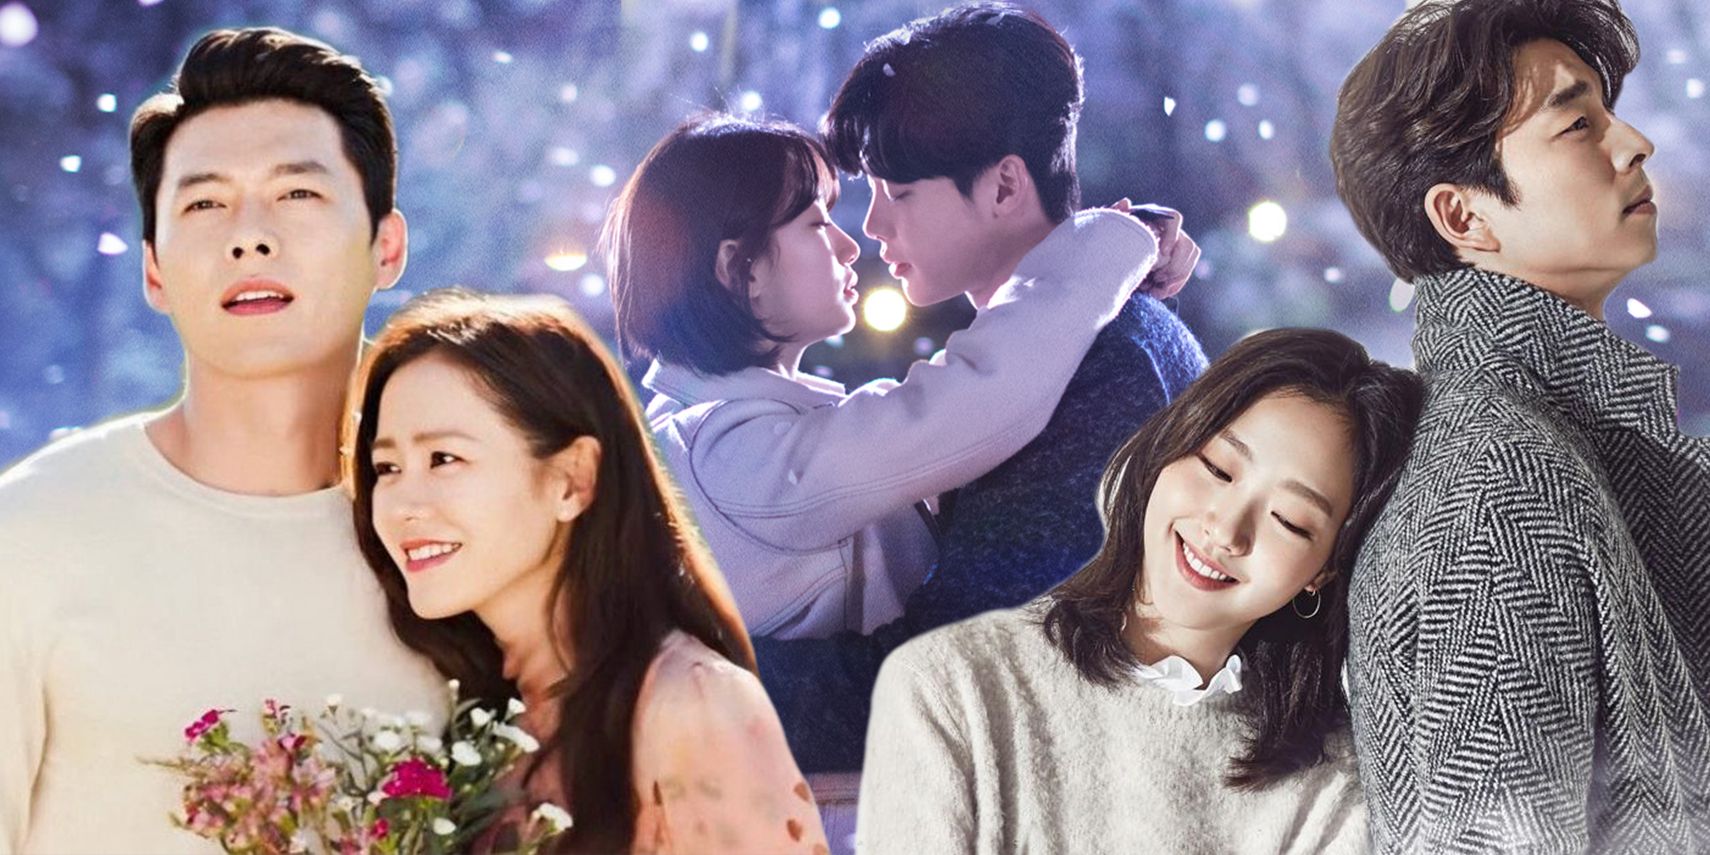 Top 15 Most Romantic K-Drama Couples For Valentine's Day, Ranked